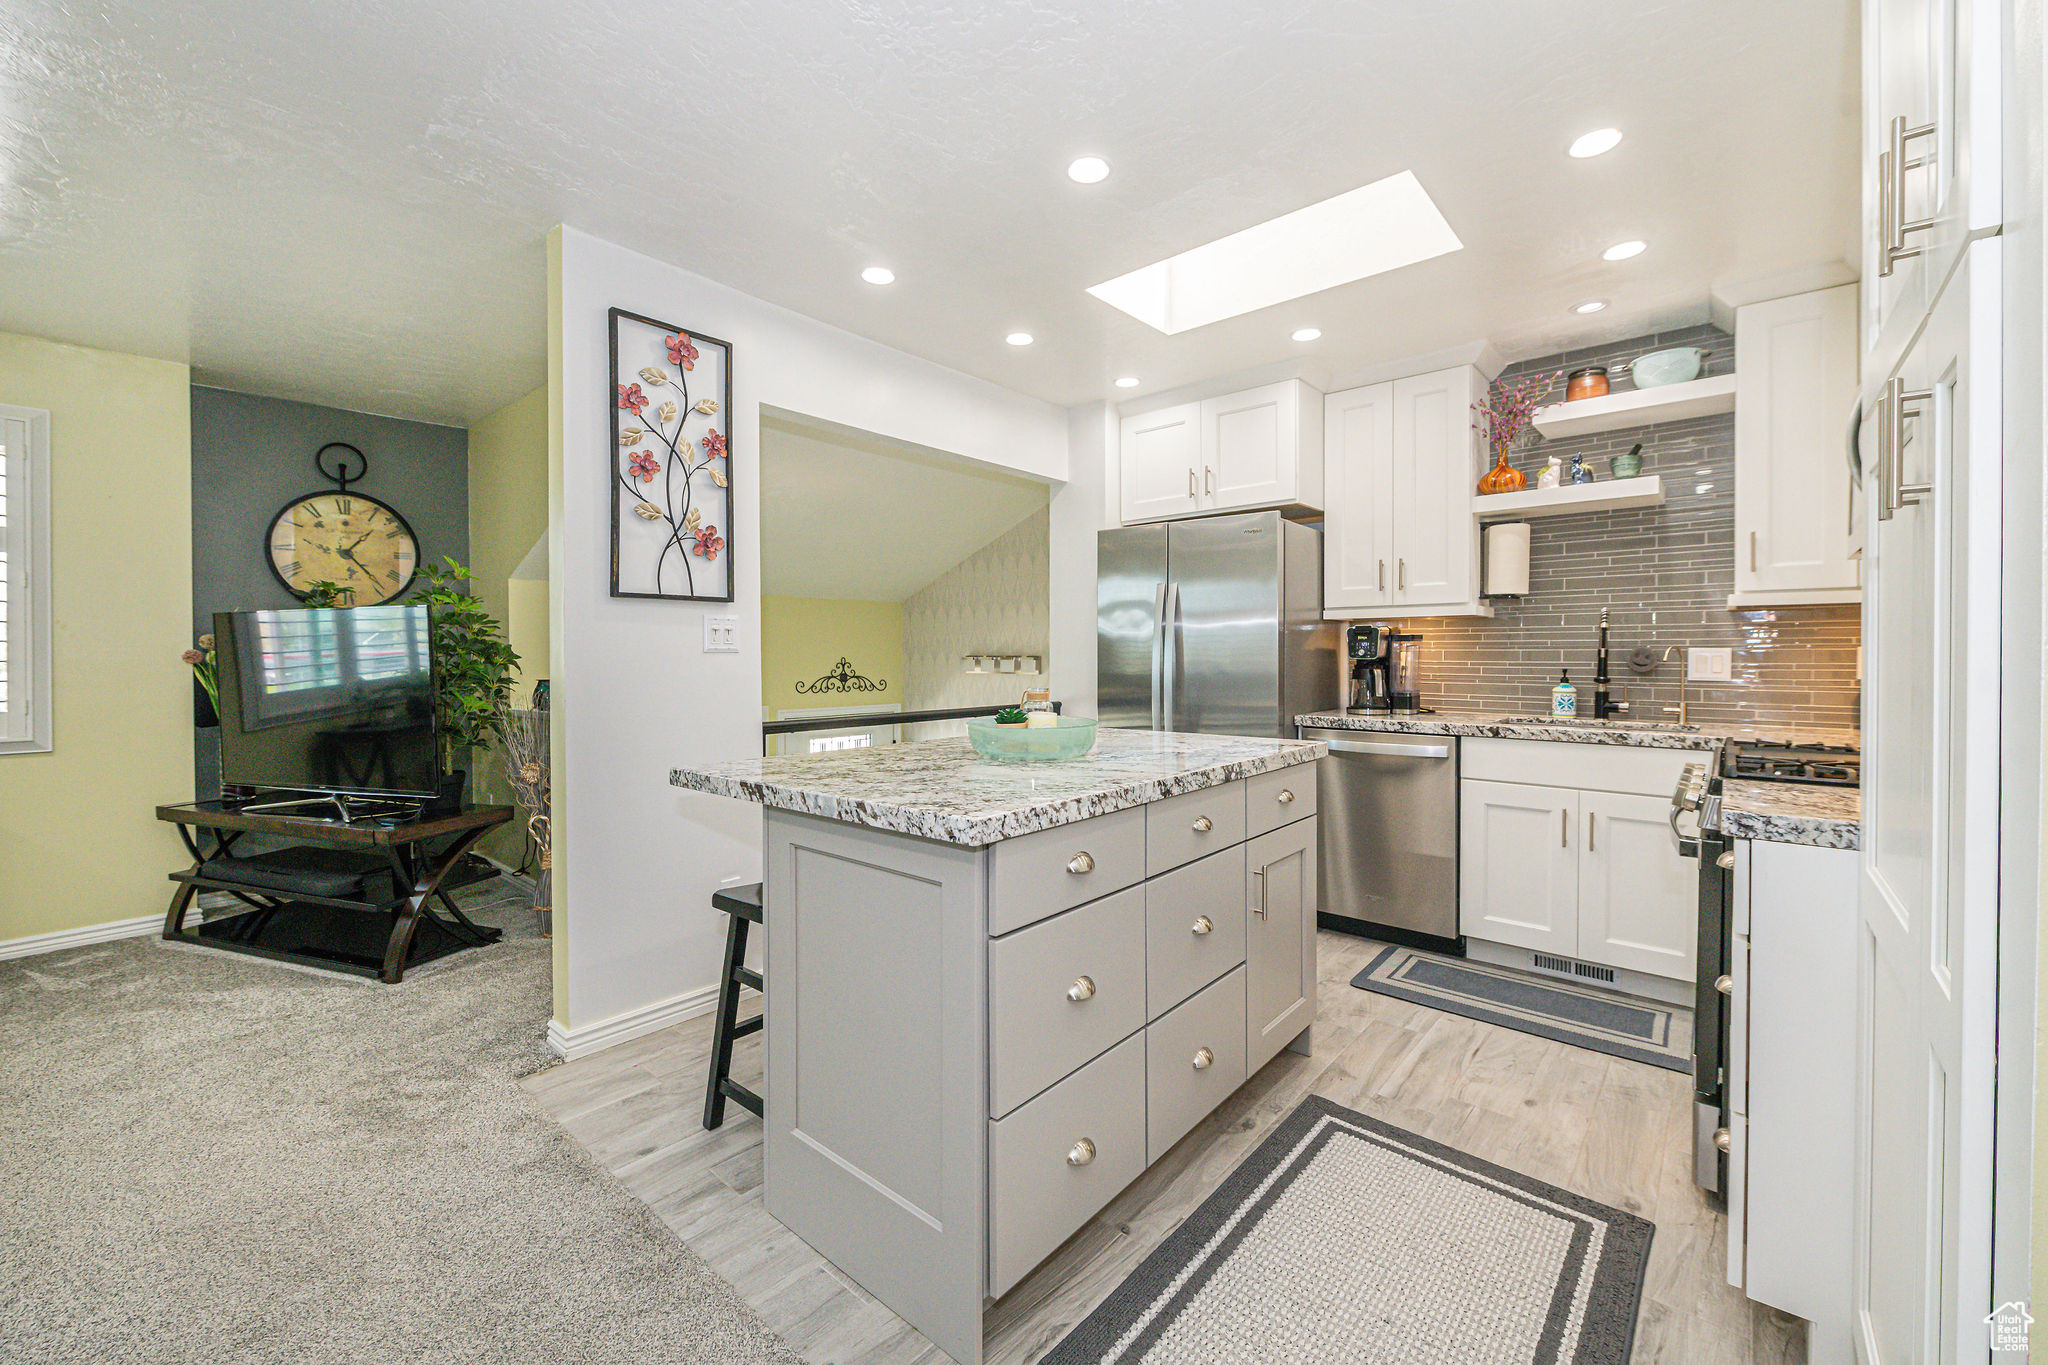 Kitchen with light colored carpet, appliances with stainless steel finishes, white cabinets, a skylight, and a center island